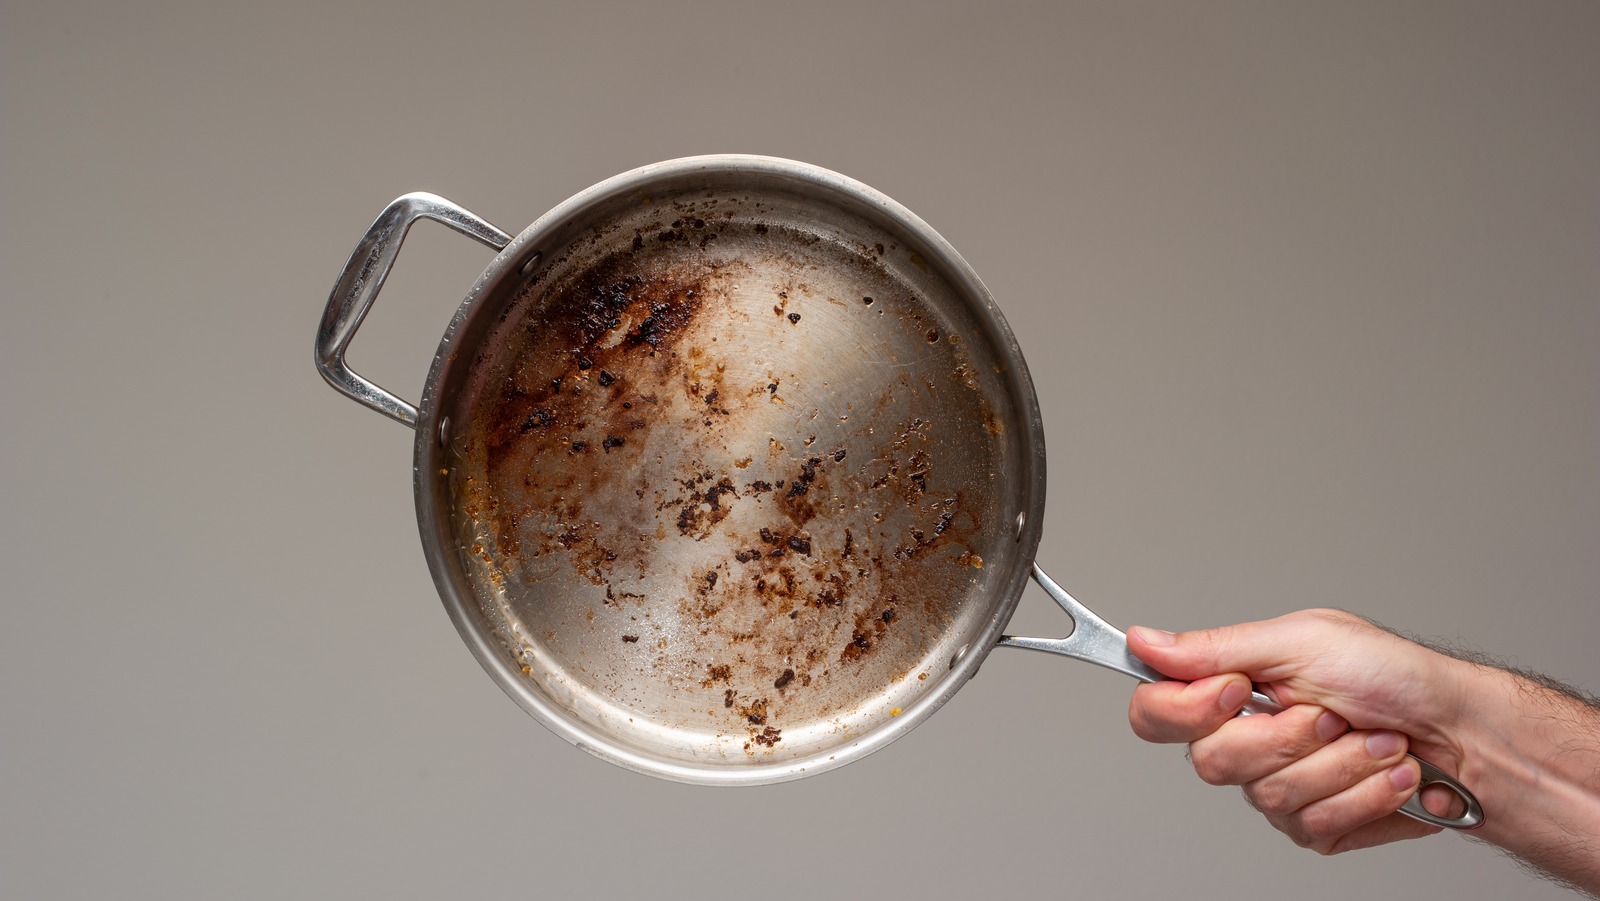 https://www.thedailymeal.com/img/gallery/how-to-clean-stainless-steel-pans-and-save-time-scrubbing/l-intro-1692994868.jpg